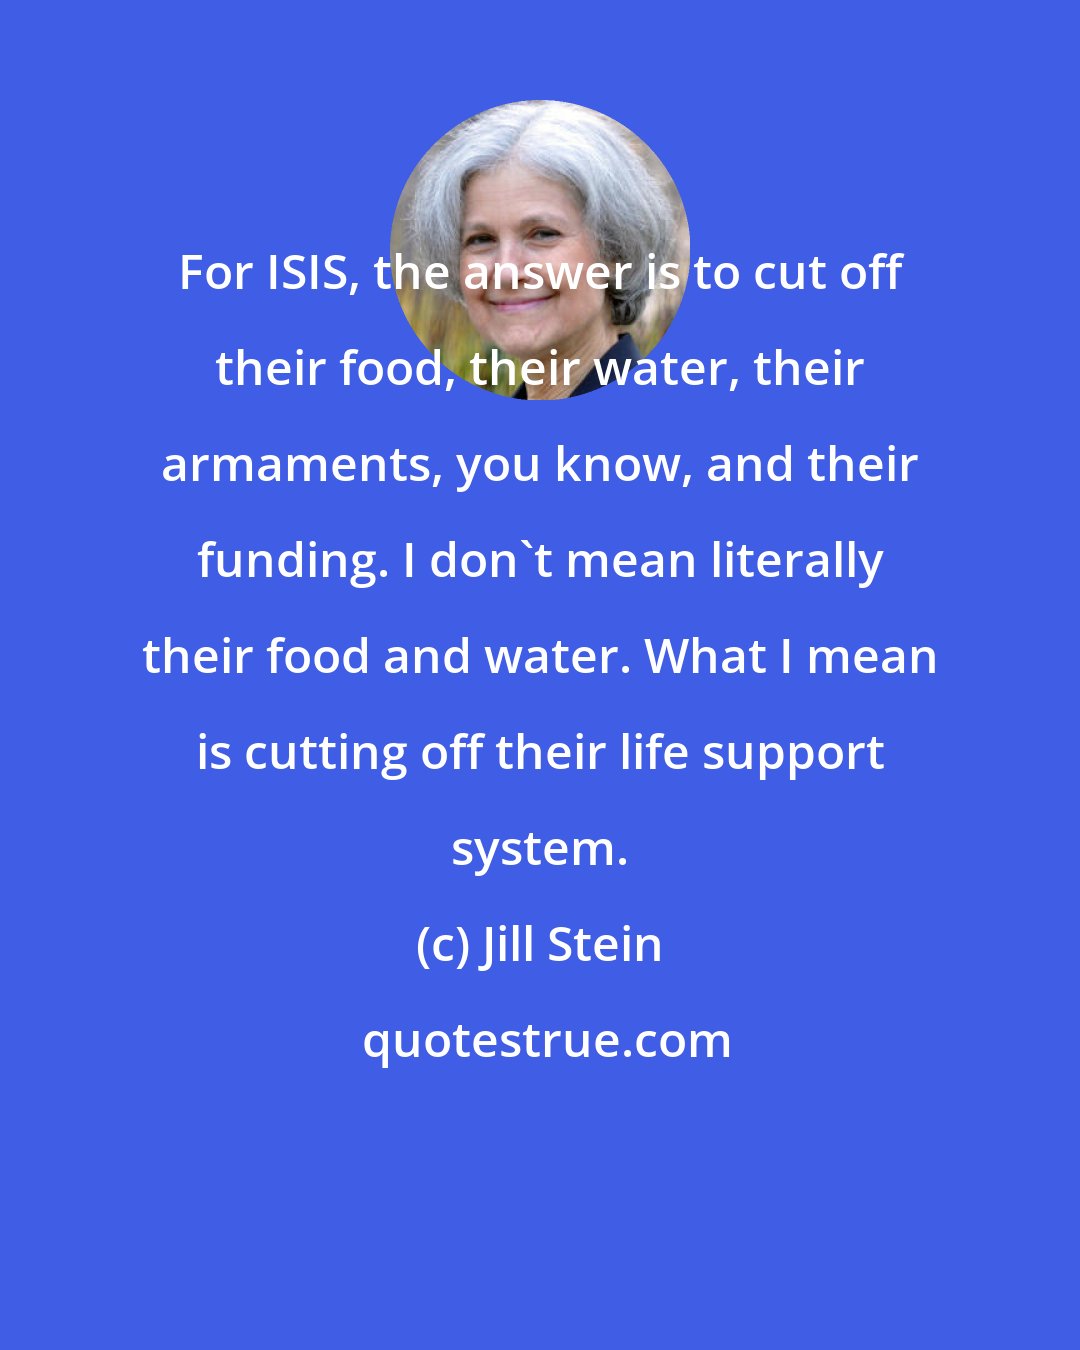 Jill Stein: For ISIS, the answer is to cut off their food, their water, their armaments, you know, and their funding. I don't mean literally their food and water. What I mean is cutting off their life support system.